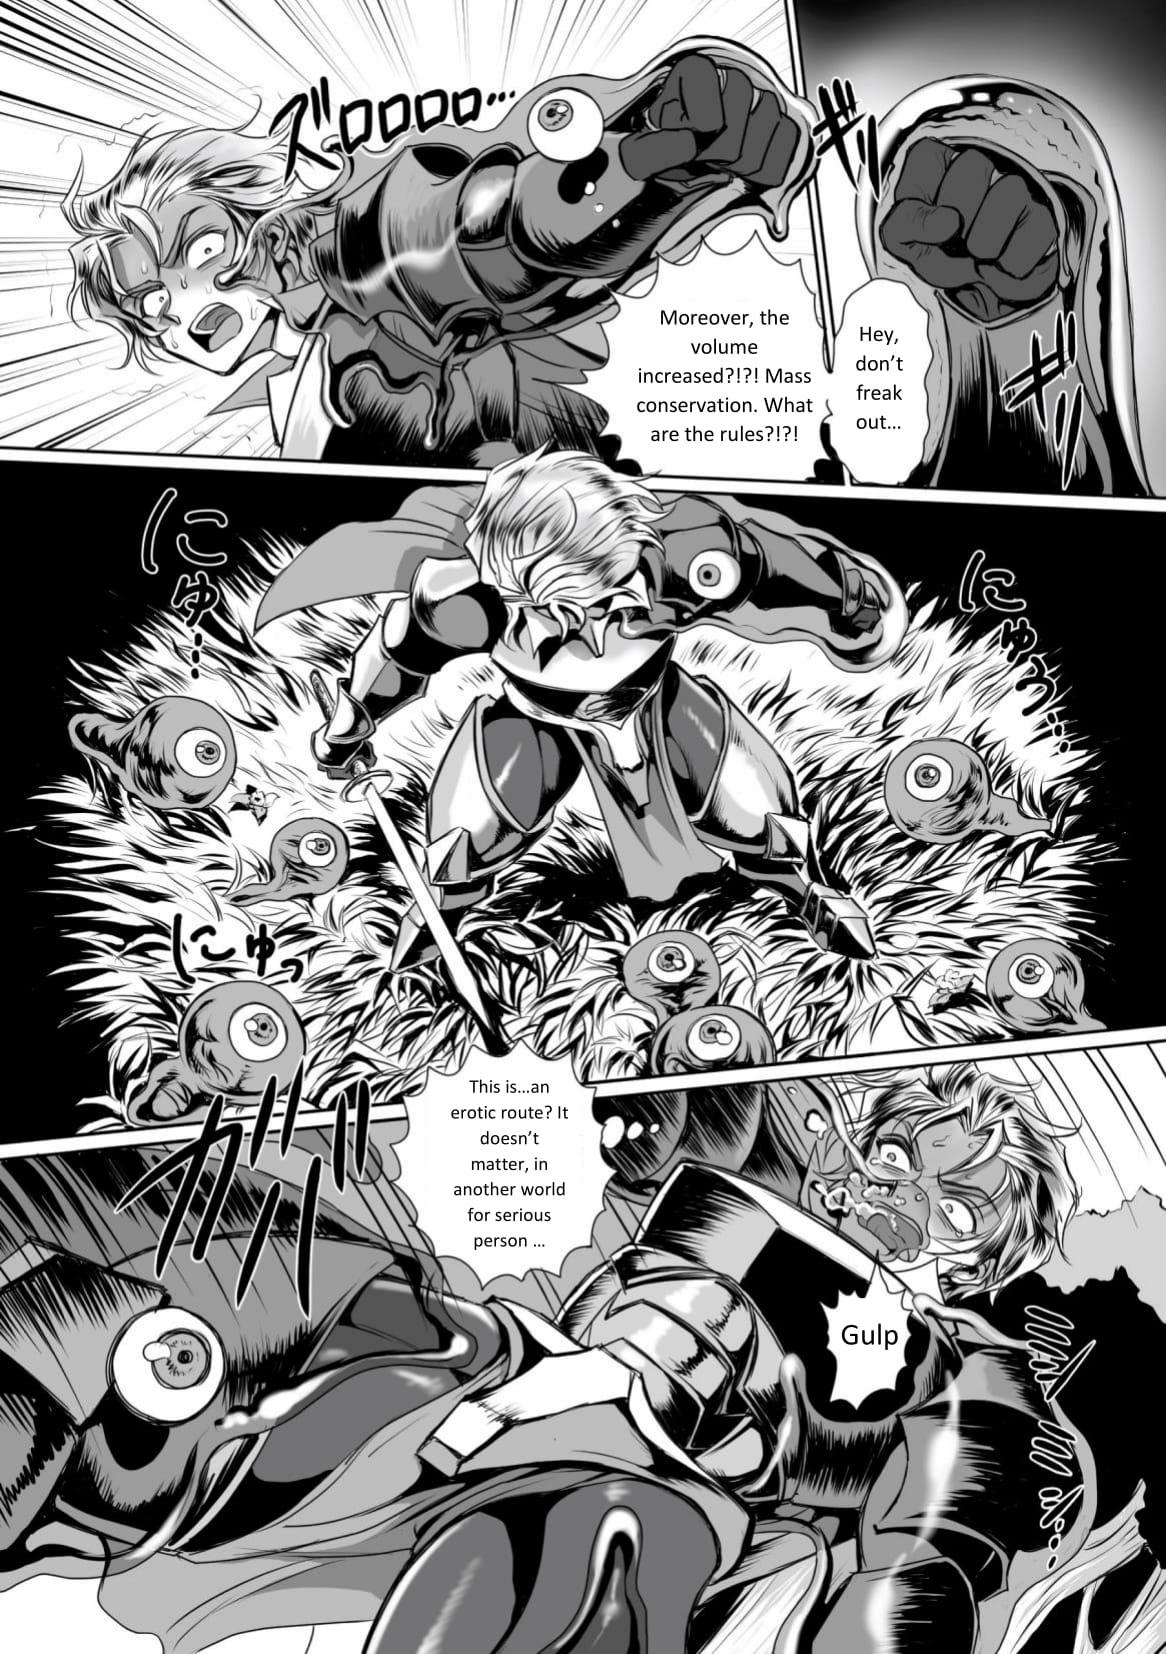 Slim [Usuno Taro] Possessed Knight Stallion-Taken Over By Disgusting Man Raped and Climaxes Unsightly - English Porno 18 - Page 12